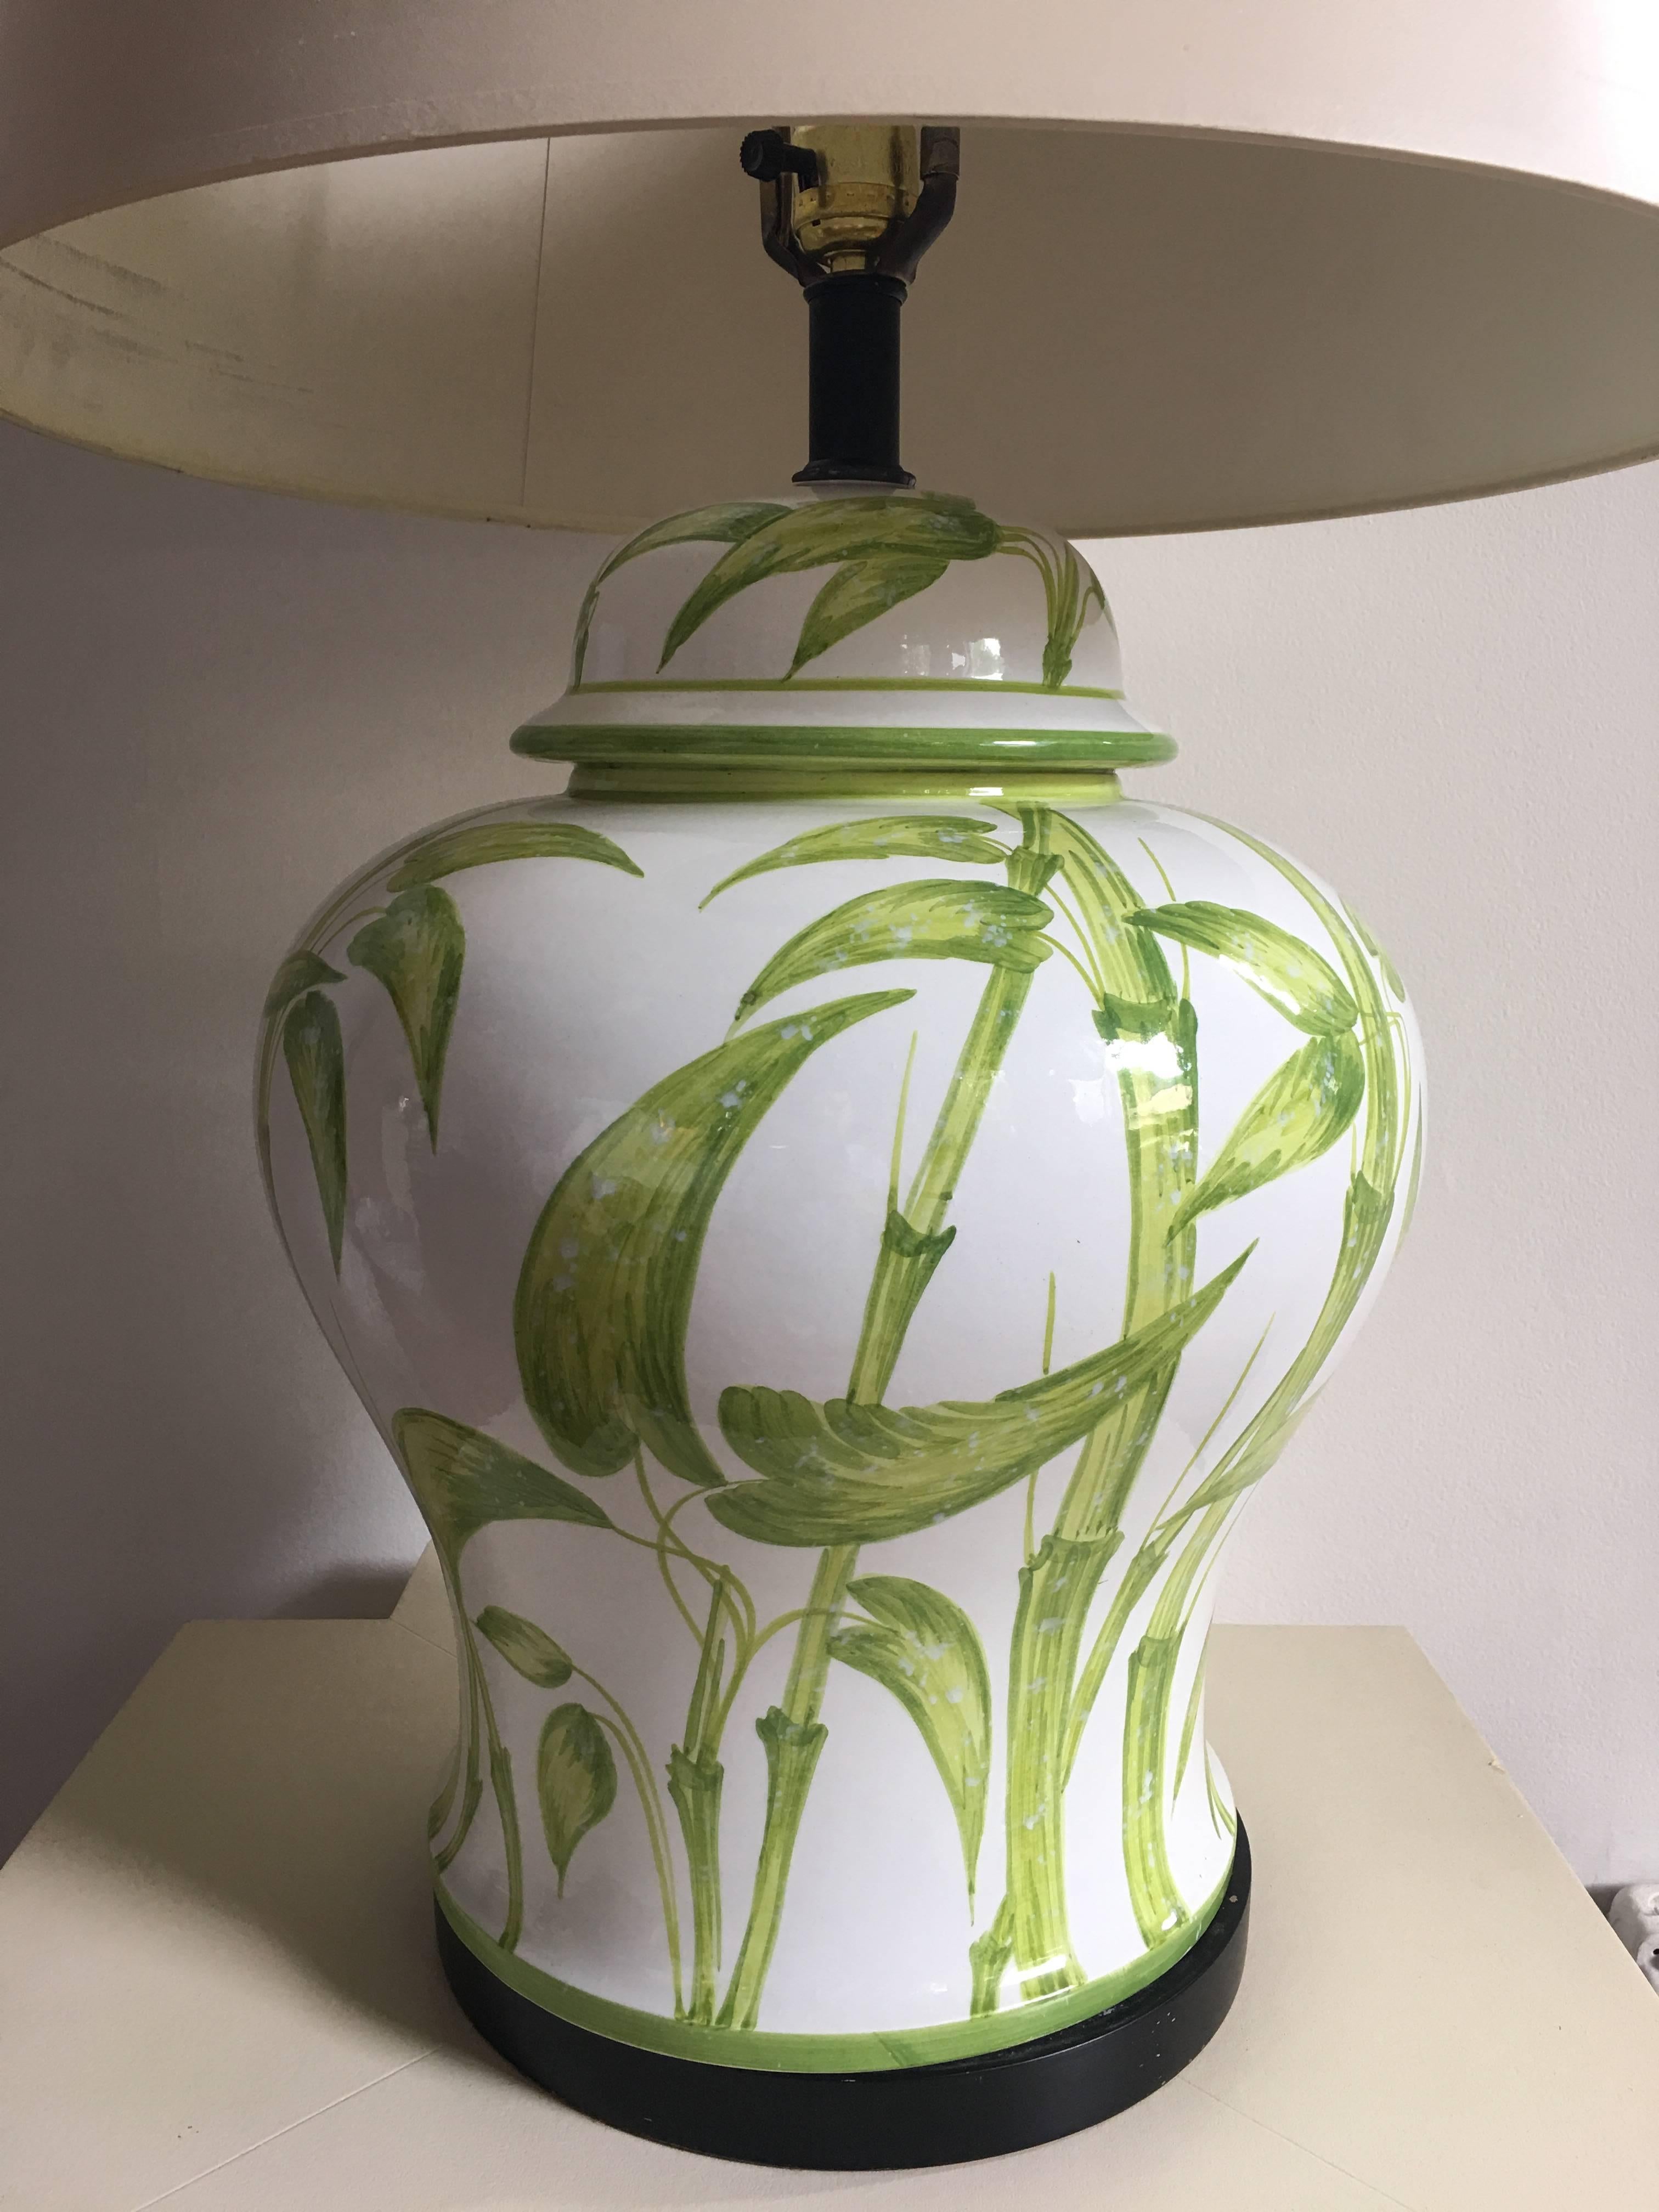 Mid-Century Modern Hollywood Regency style ceramic ginger jar table lamp with hand-painted bamboo leaf or botanical motif over a gloss white glaze. This Palm Regency Style lamp is marked 